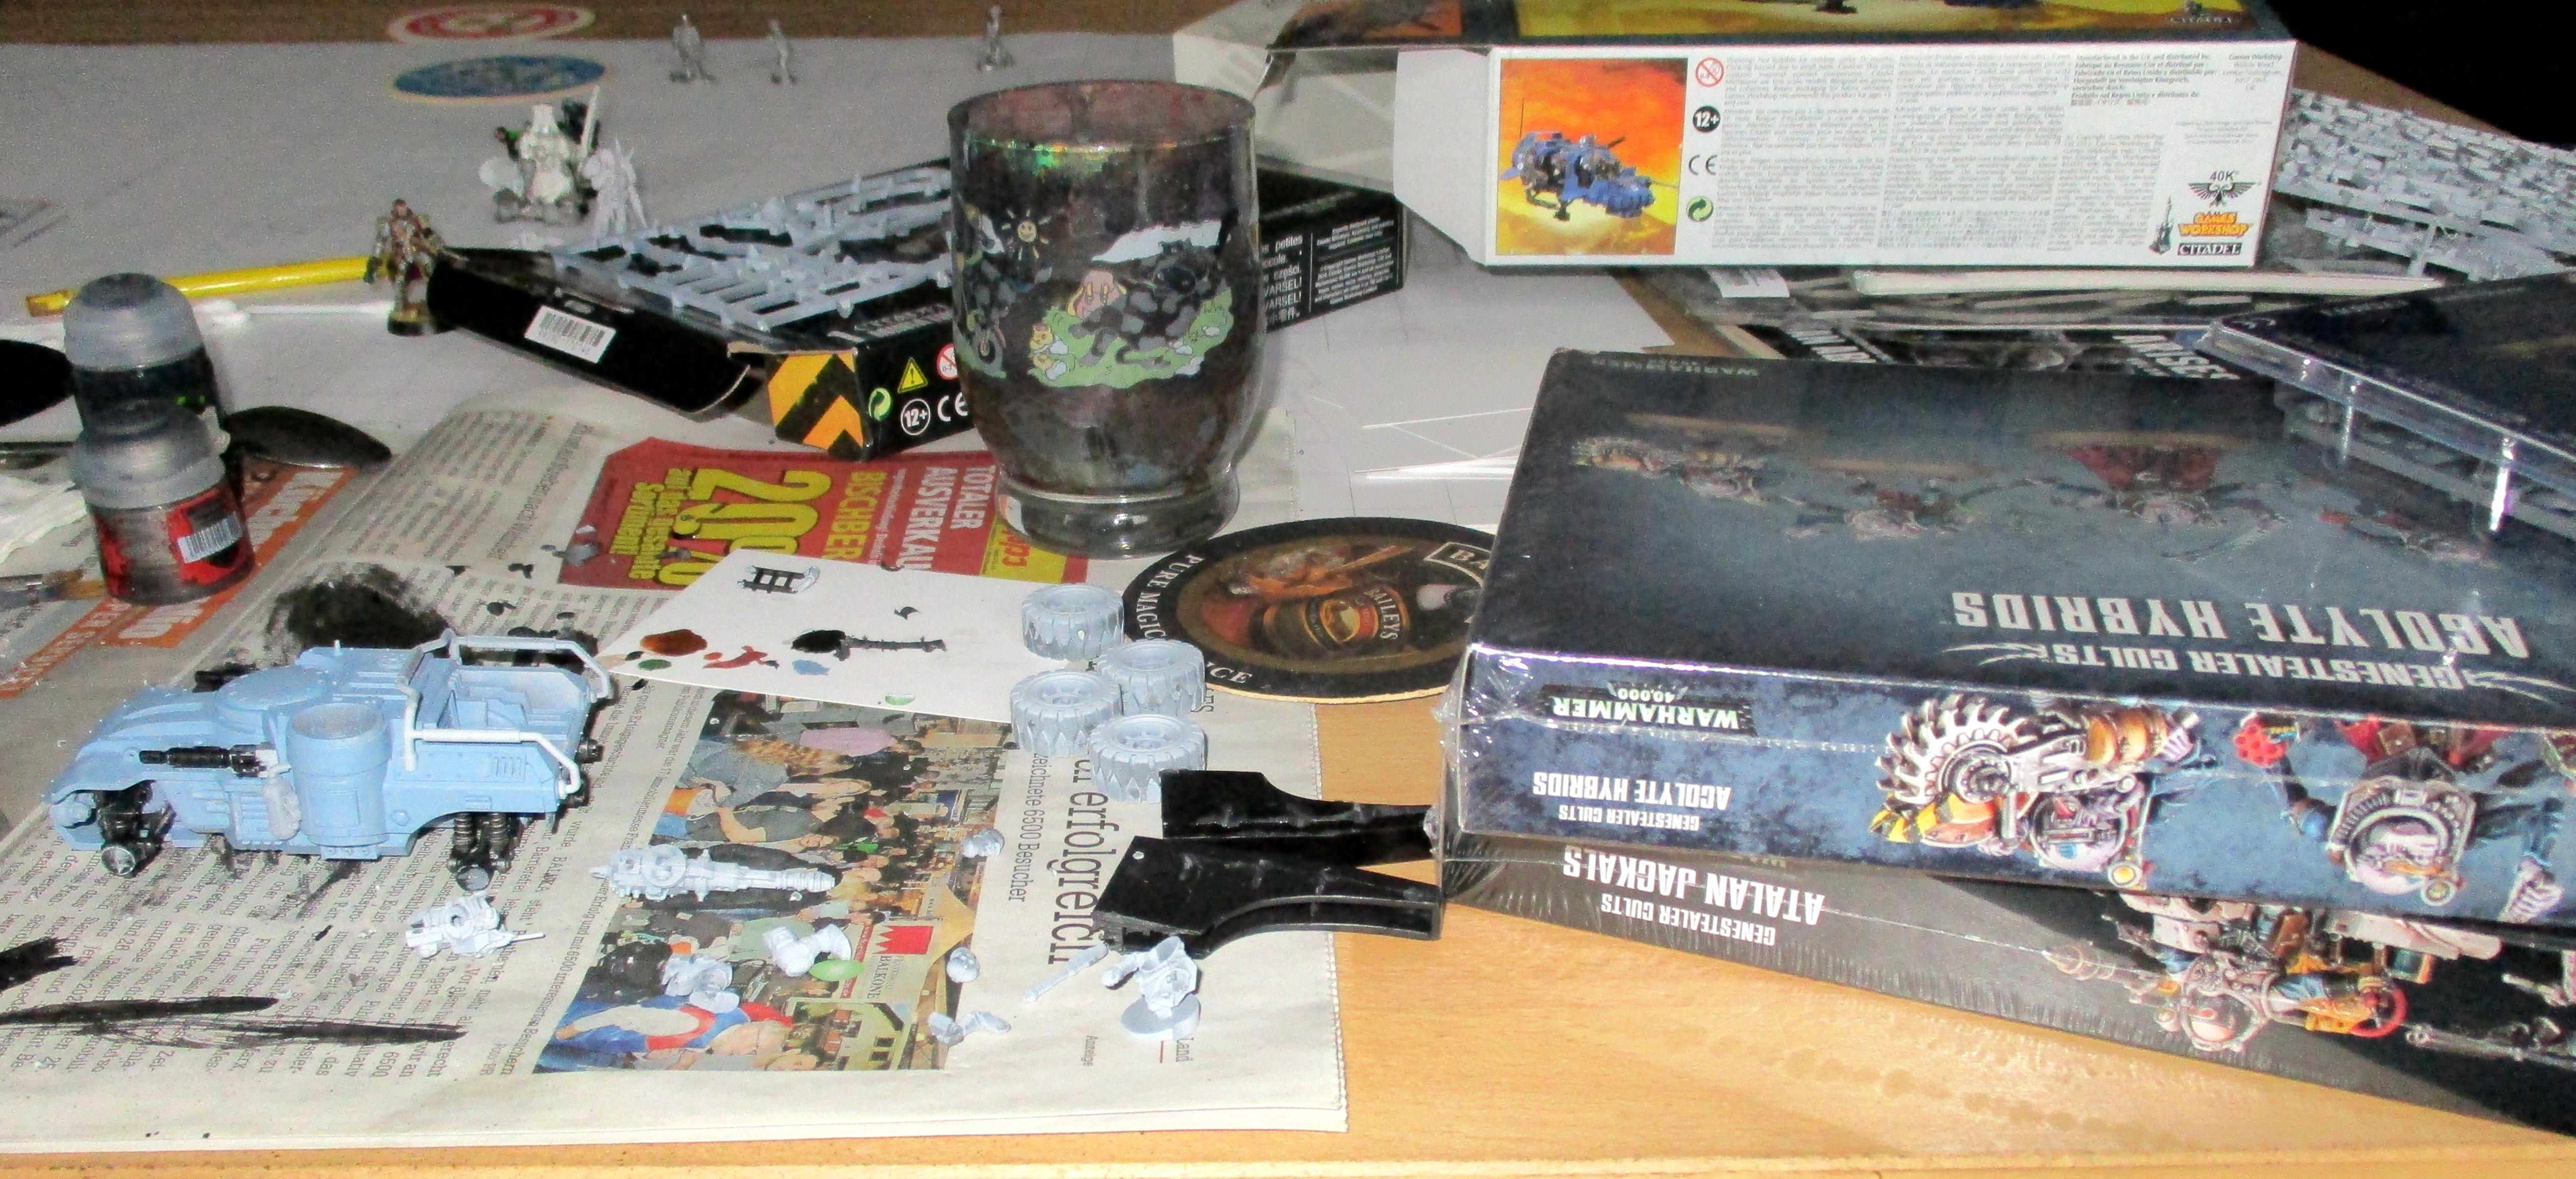 Confessions of a wargaming horder3